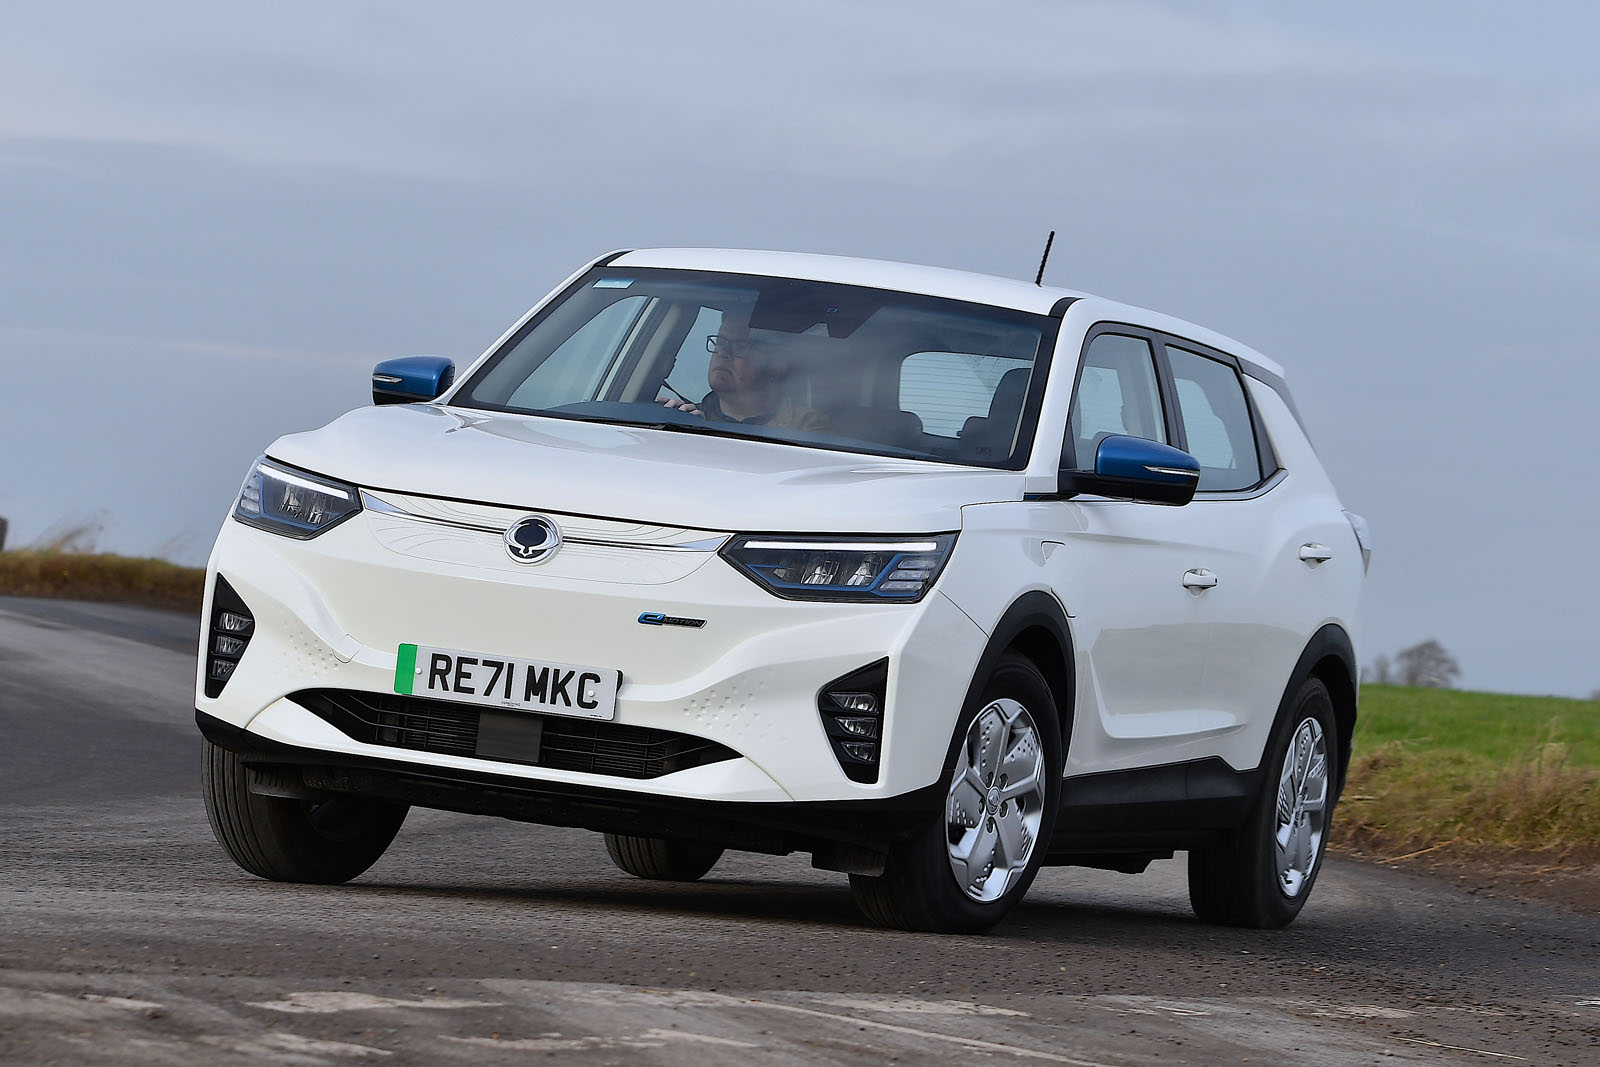 Ssangyong confirms rebrand to KG Mobility